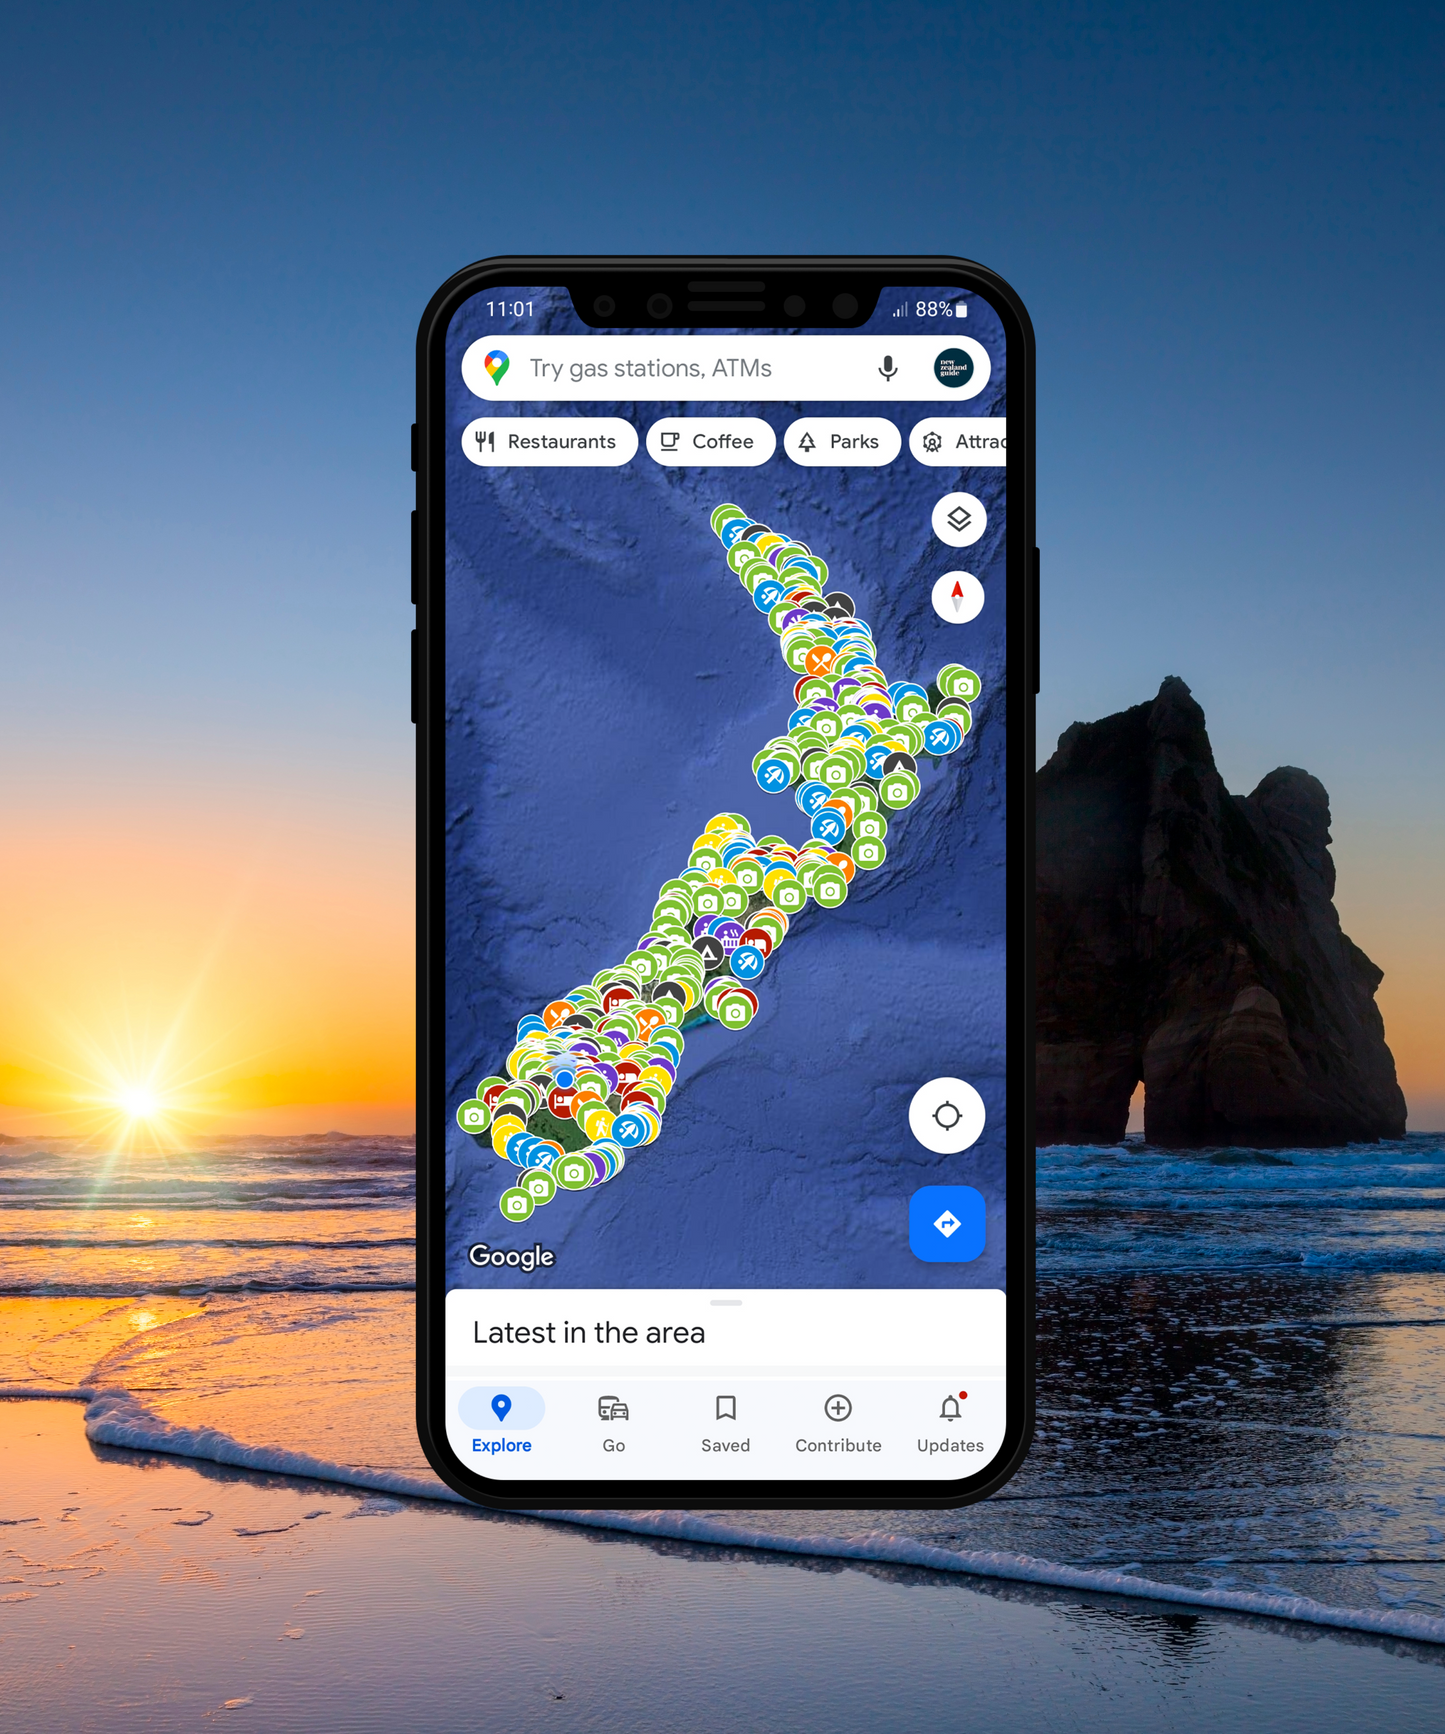 The New Zealand Guide Map